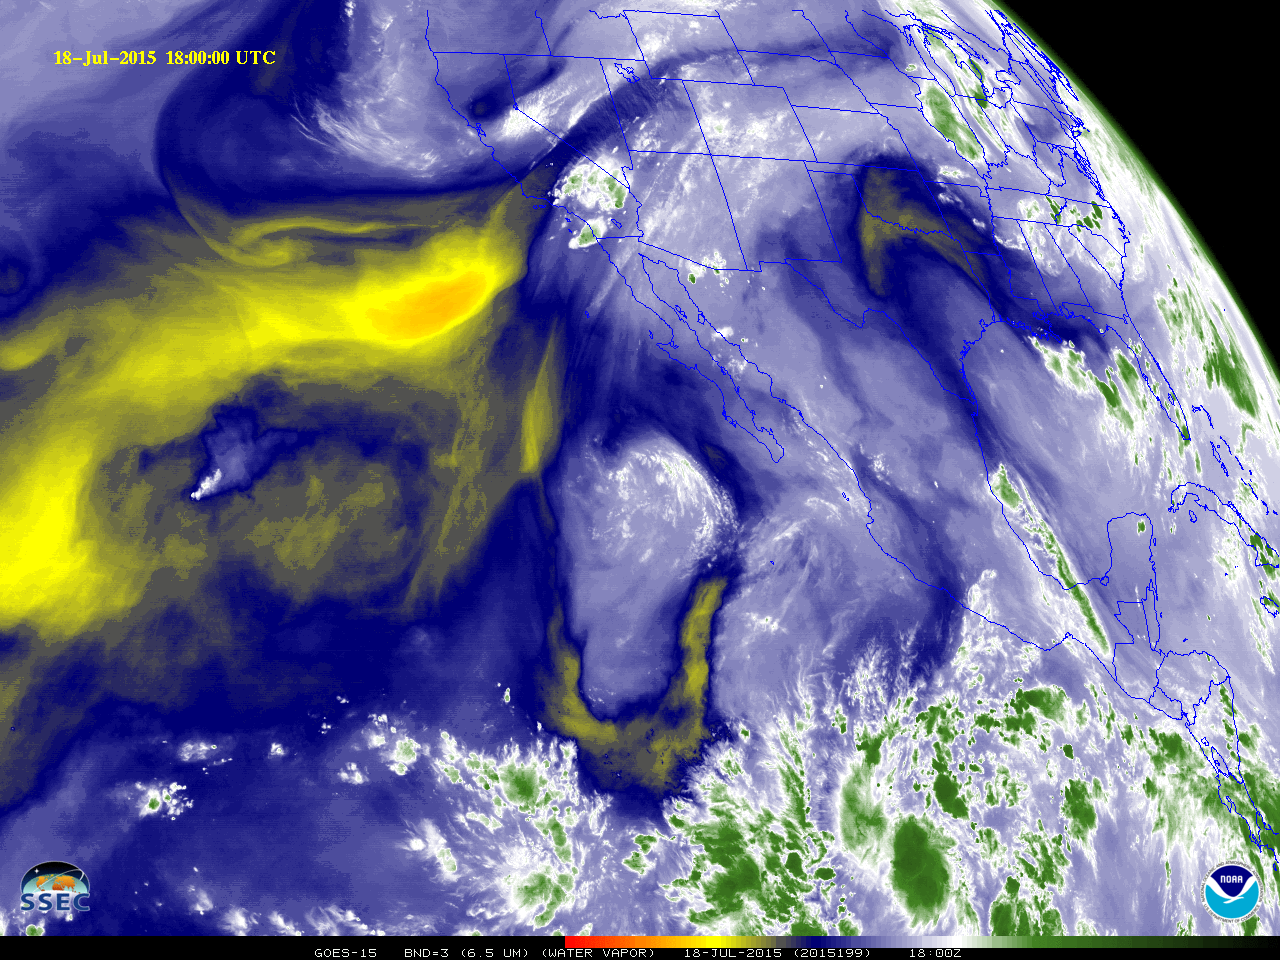 GOES-15 Infrared Water Vapor (6.5 µm) Images  (click to play animation)